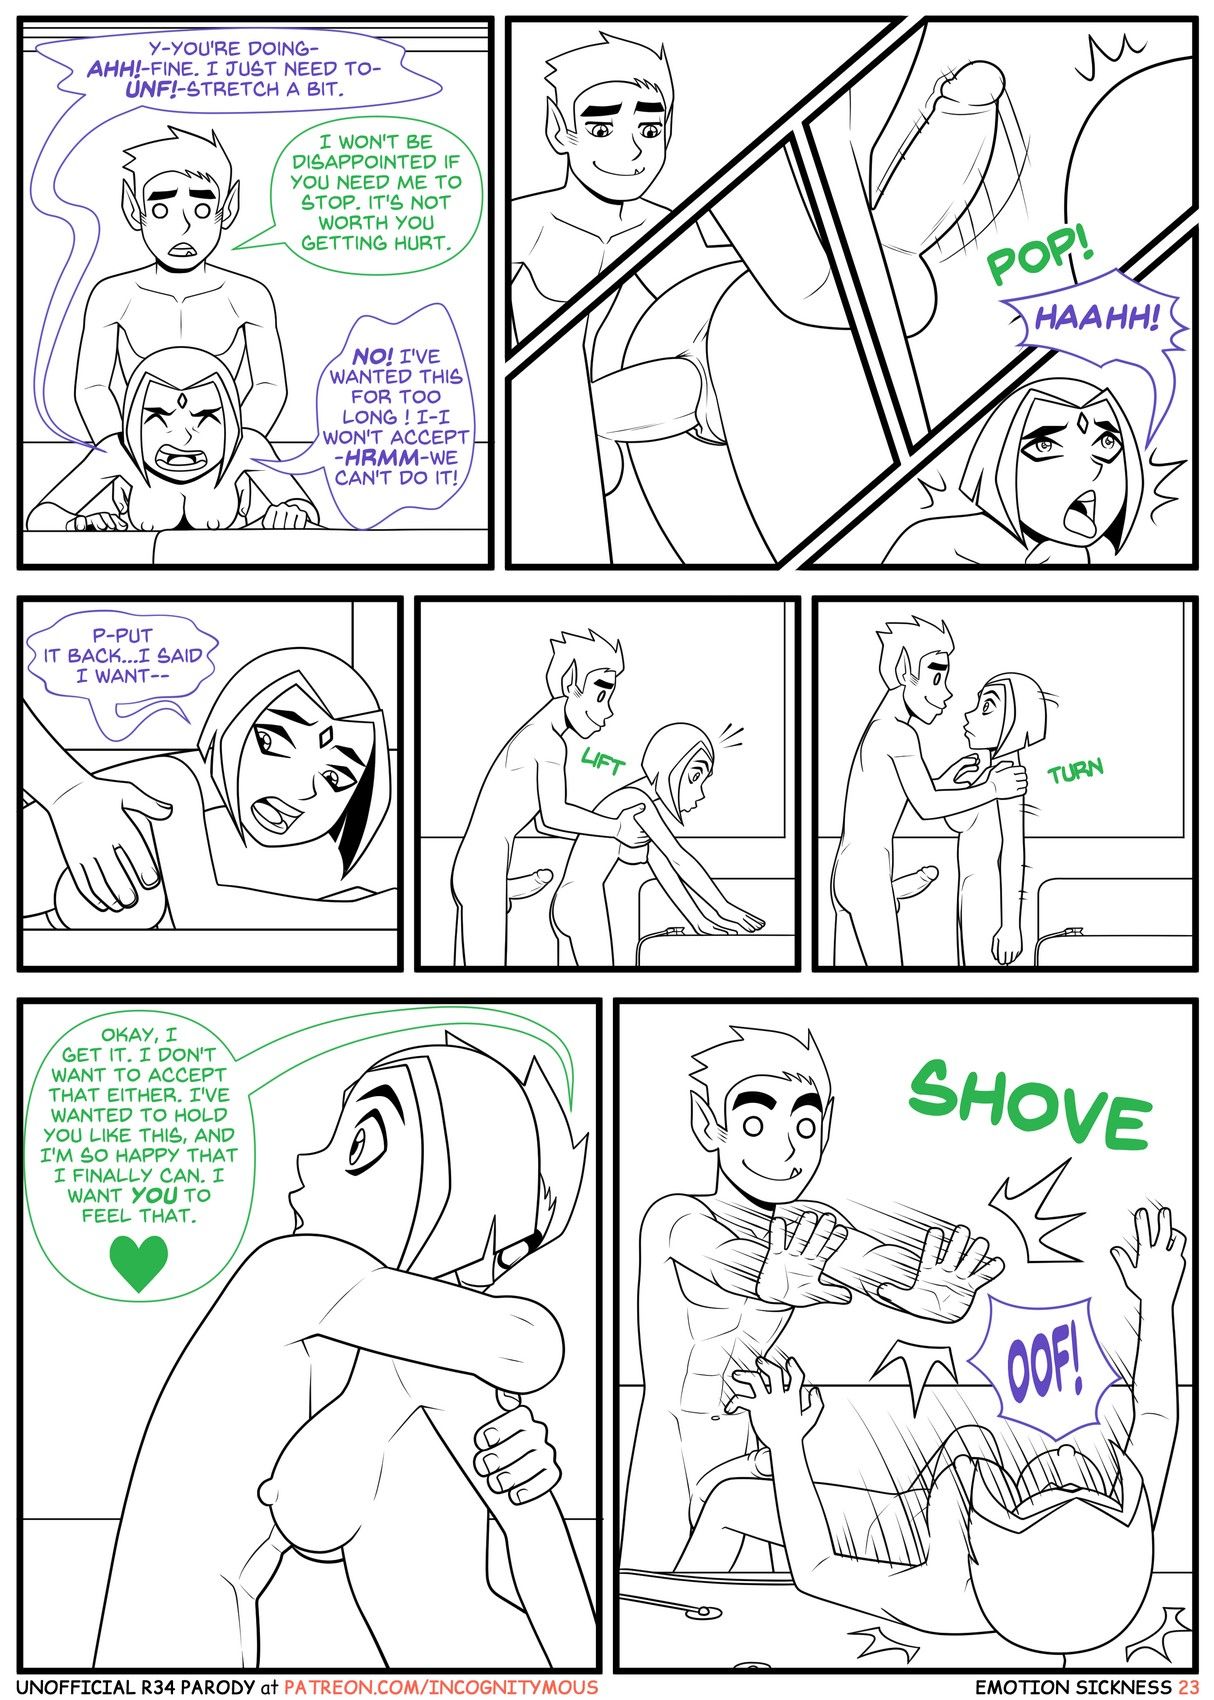 Teen Titans - Emotion Sickness (Incognitymous) page 45